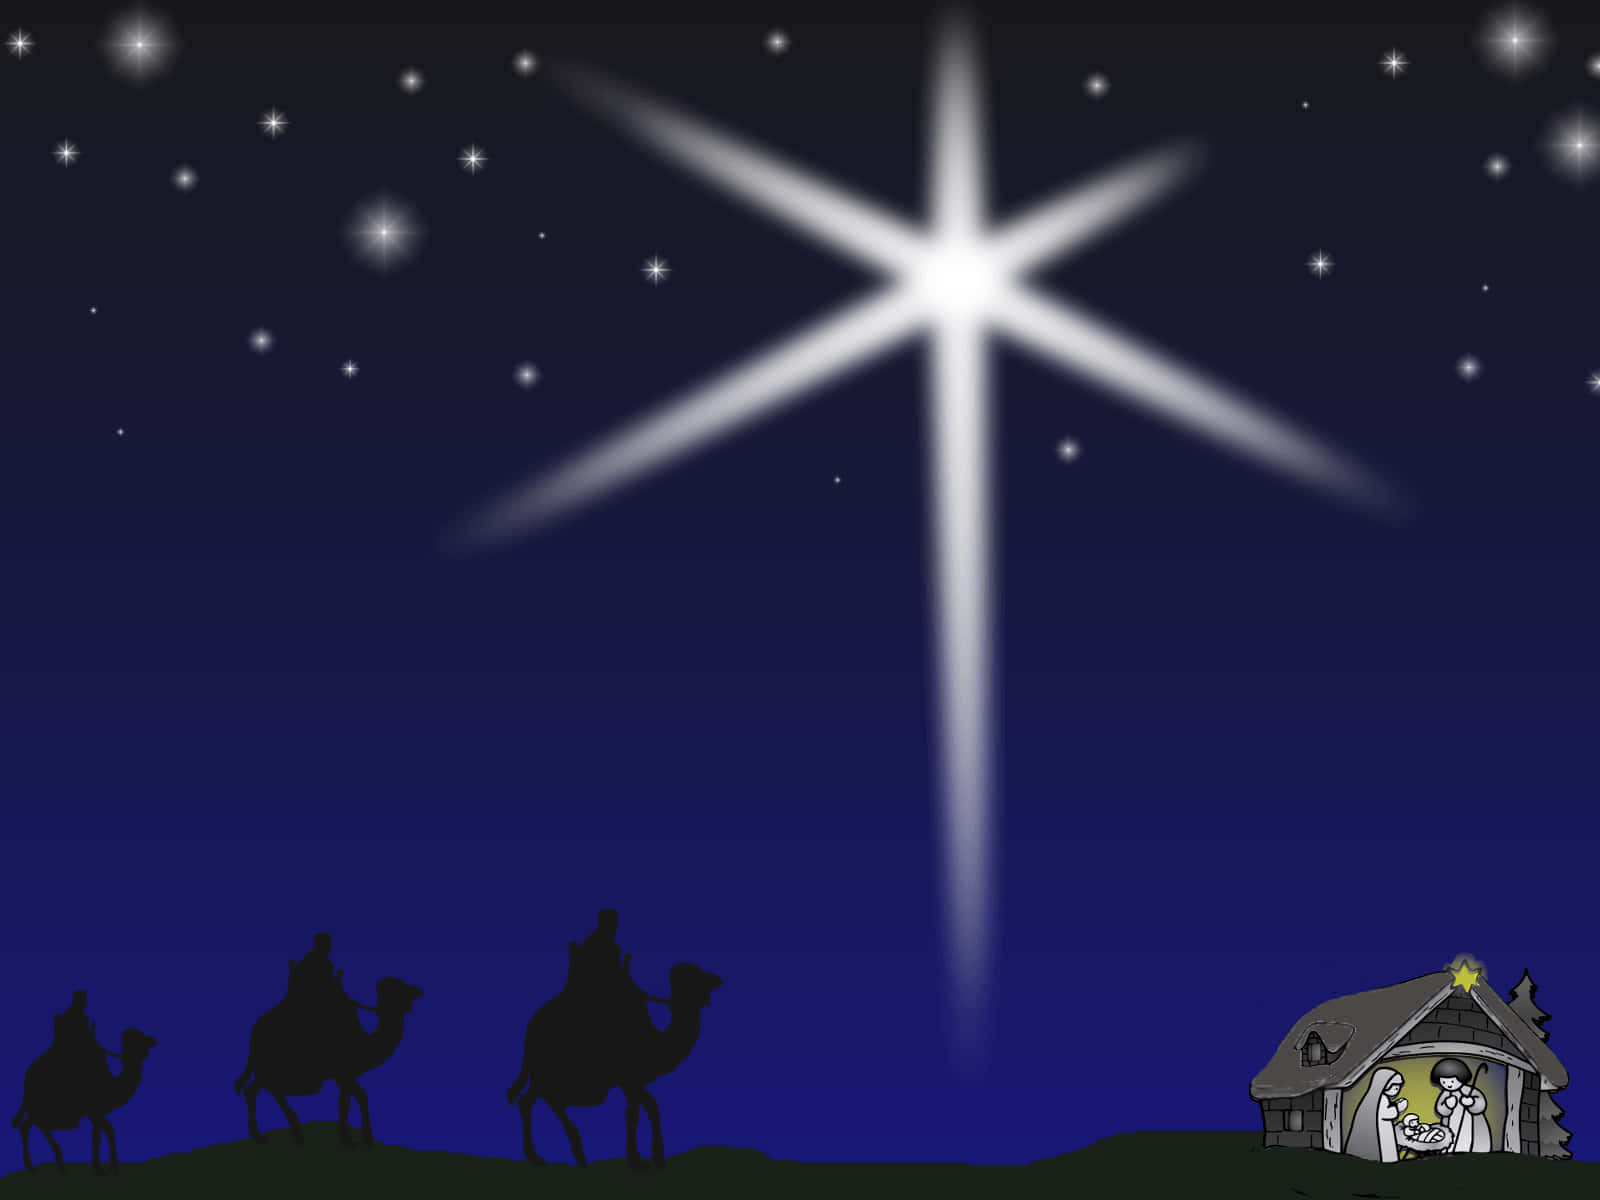 Celebrate the true meaning of Christmas this holiday season – with a nativity scene depicting the birth of Jesus Christ. Wallpaper